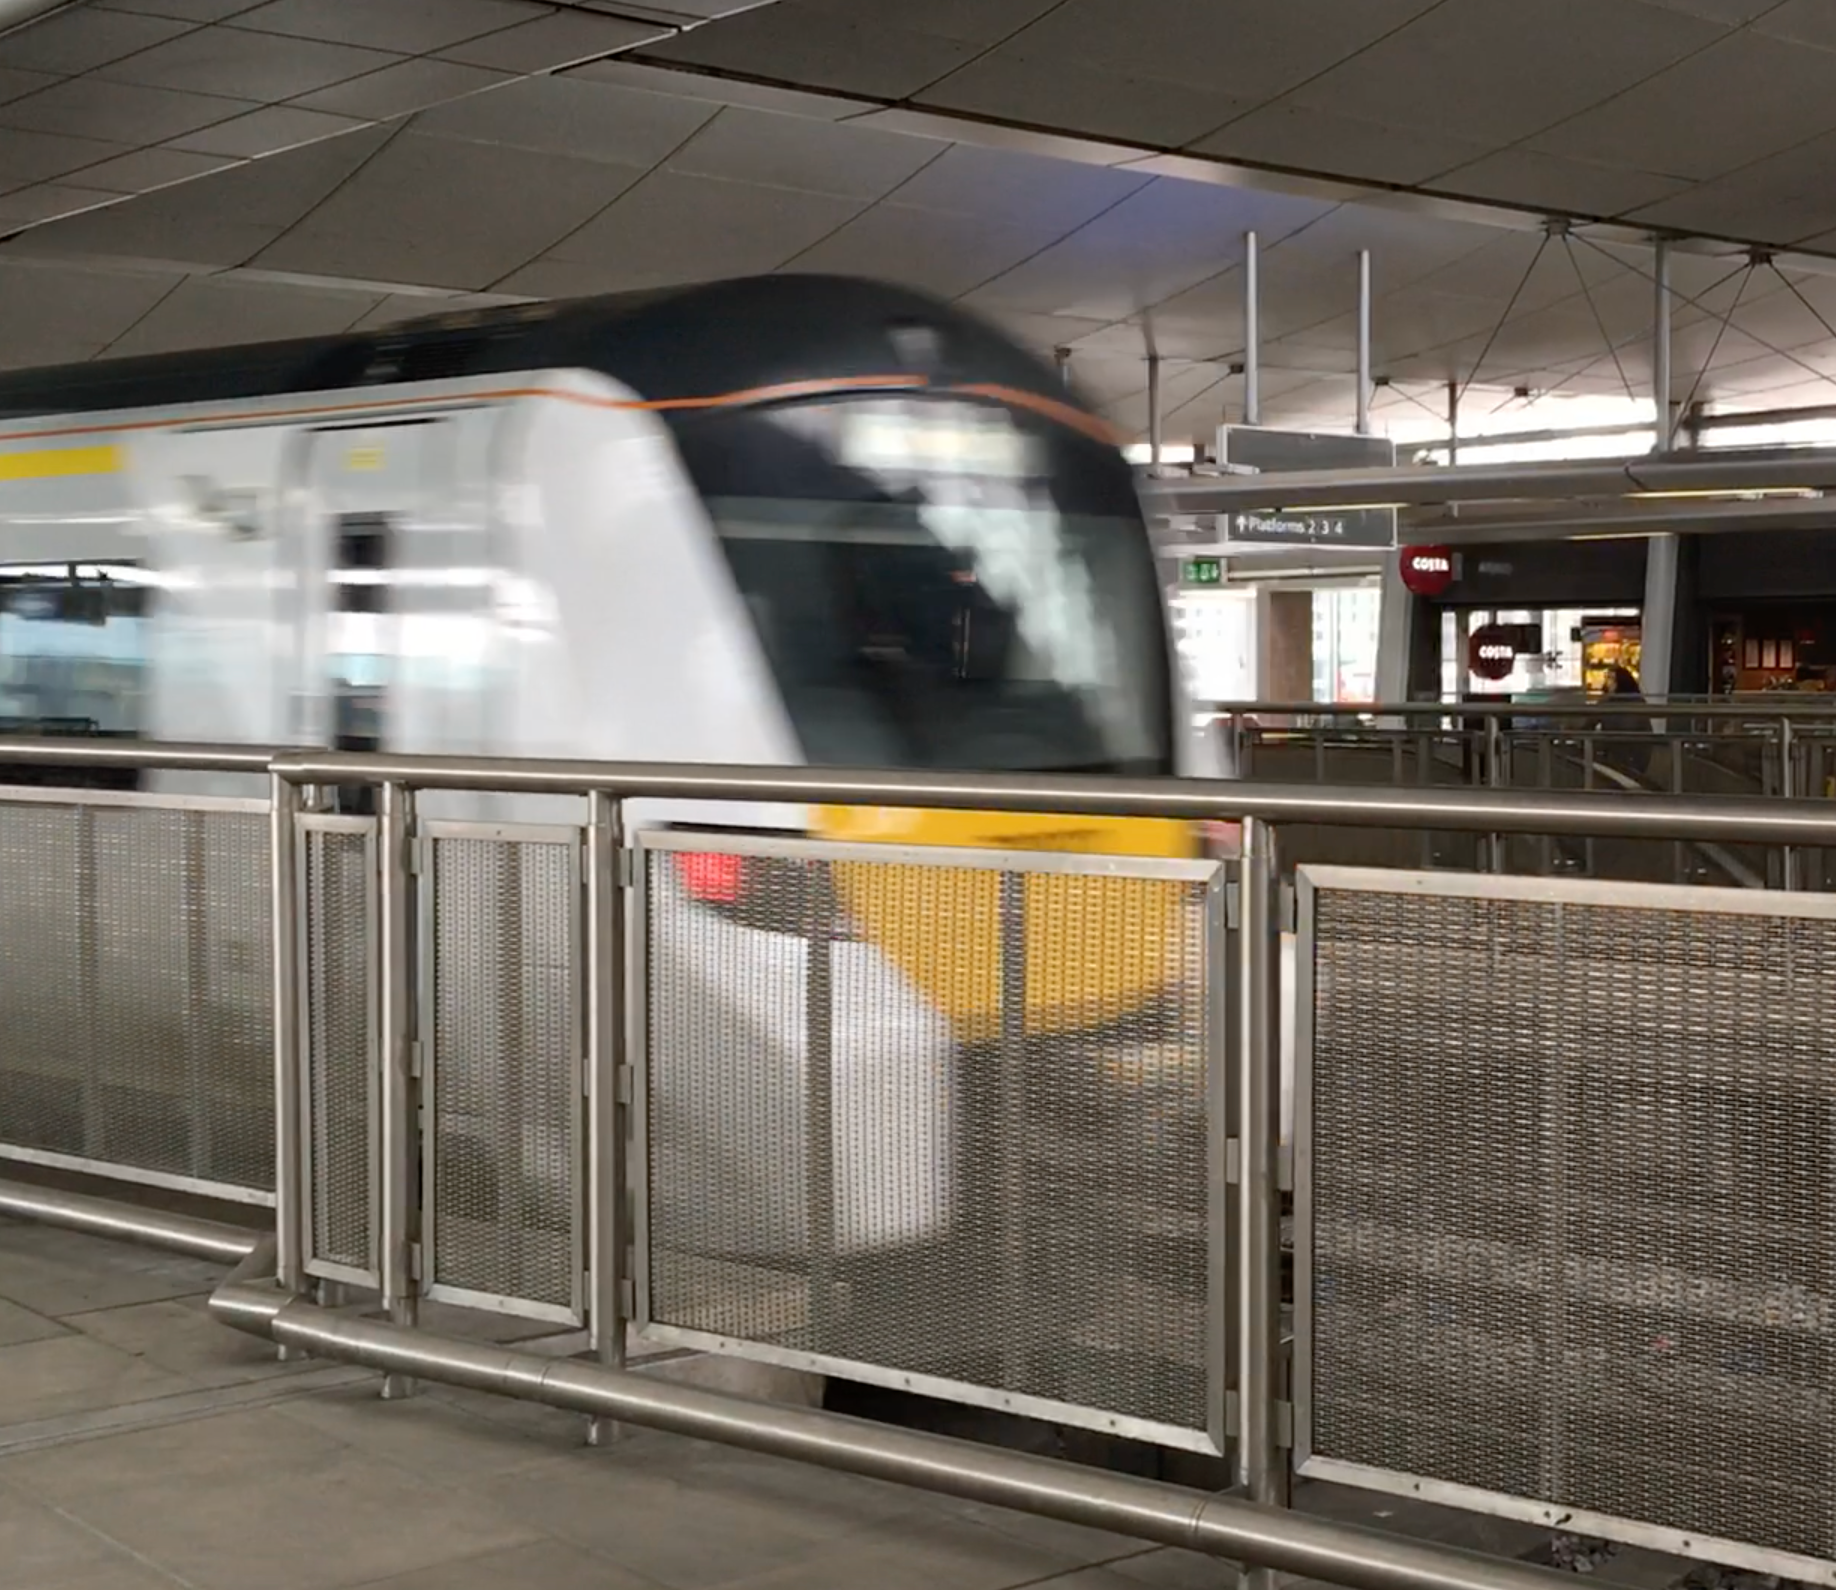 Going places? A Thameslink train arriving at London Blackfriars, one of the stations affected by staff shortages